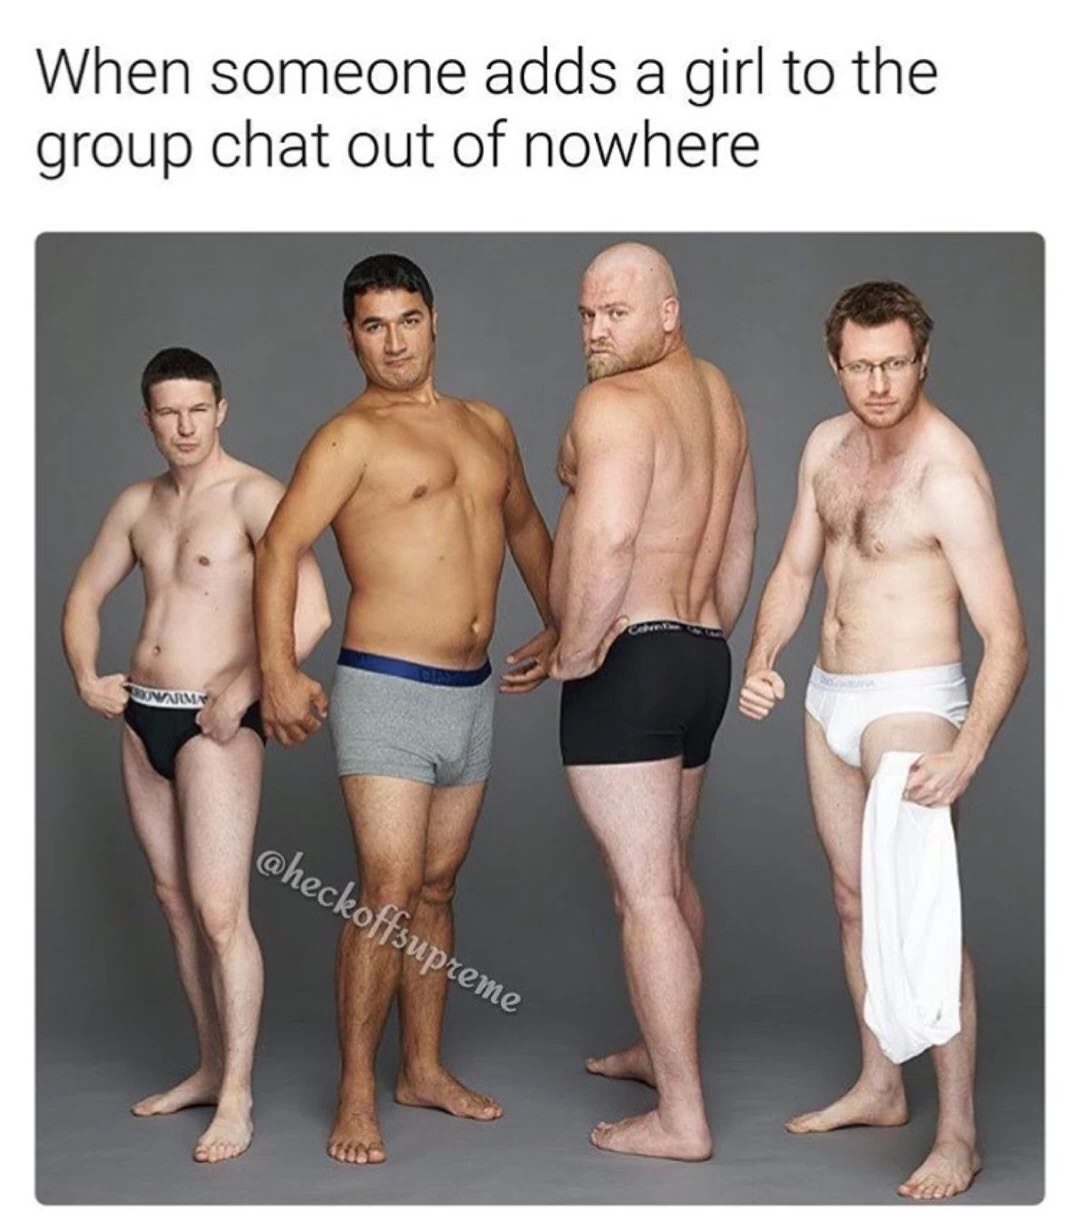 boxer or briefs - When someone adds a girl to the group chat out of nowhere Varma